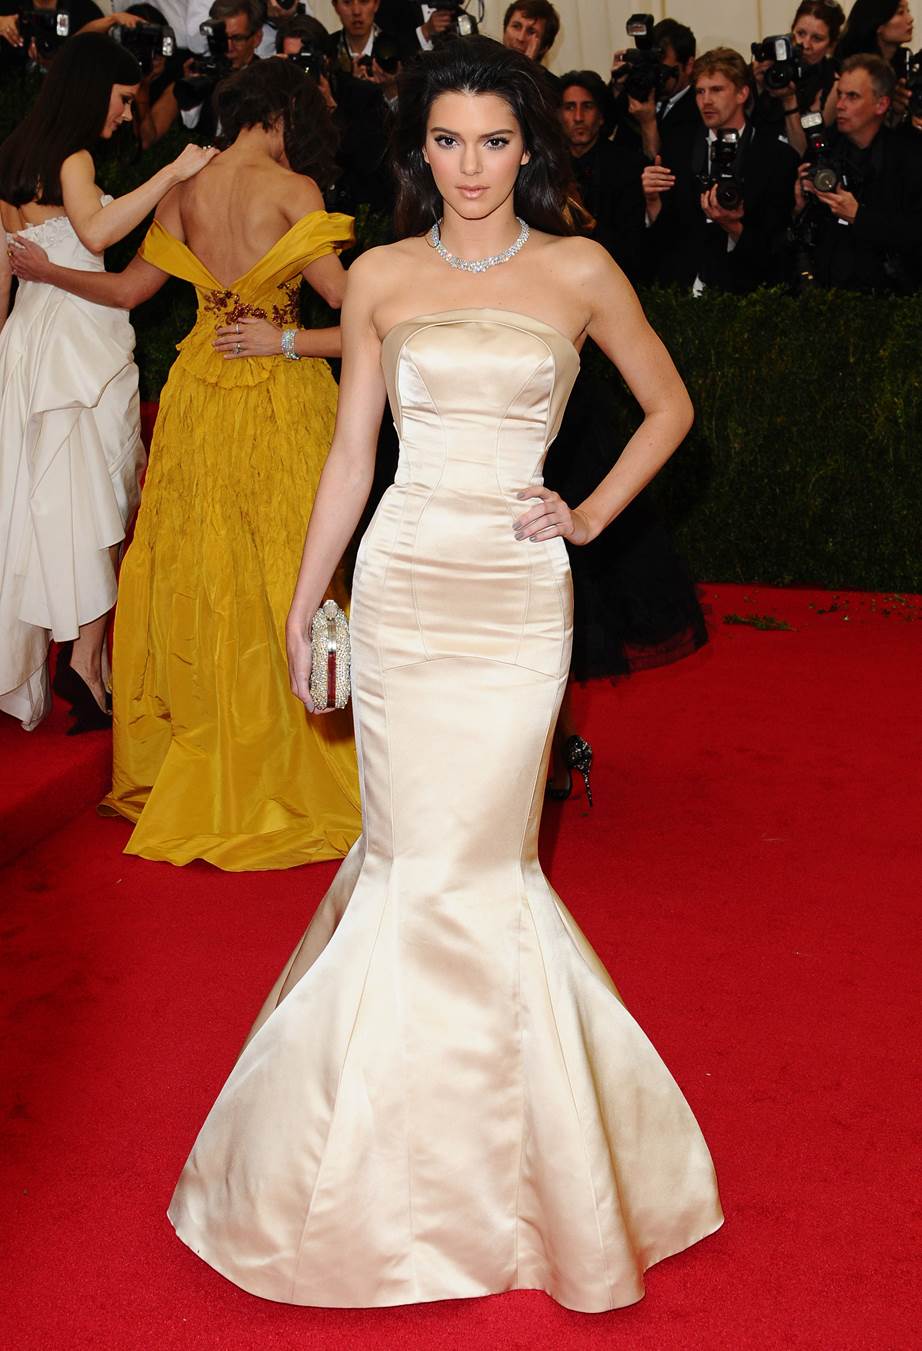 Kendall Jenner, 2014 Kendall Jenner wore Topshop to her first Met Gala (We're guessing she didn't pick it up in the Oxford Circus branch the night before, though).